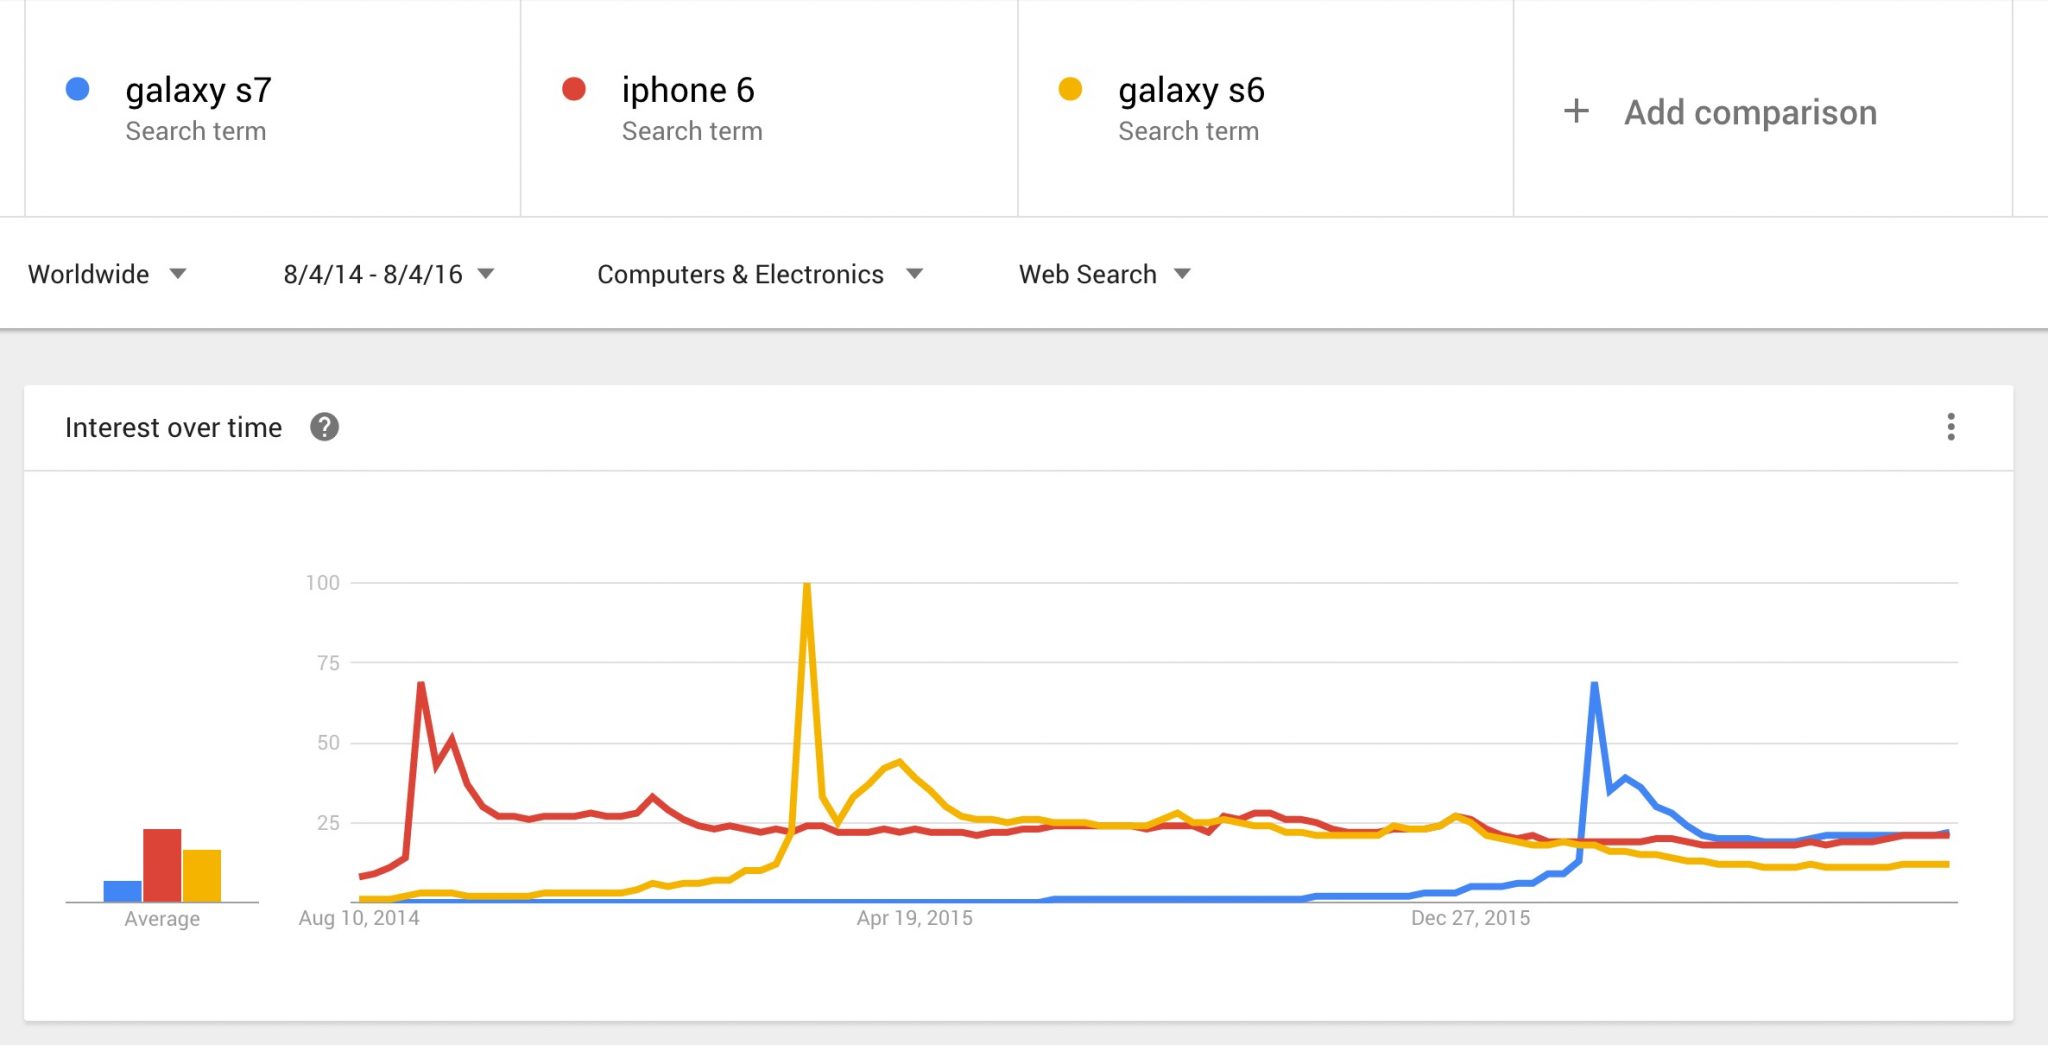 Search Trend - Galaxy s7, s6 vs. iPhone 6